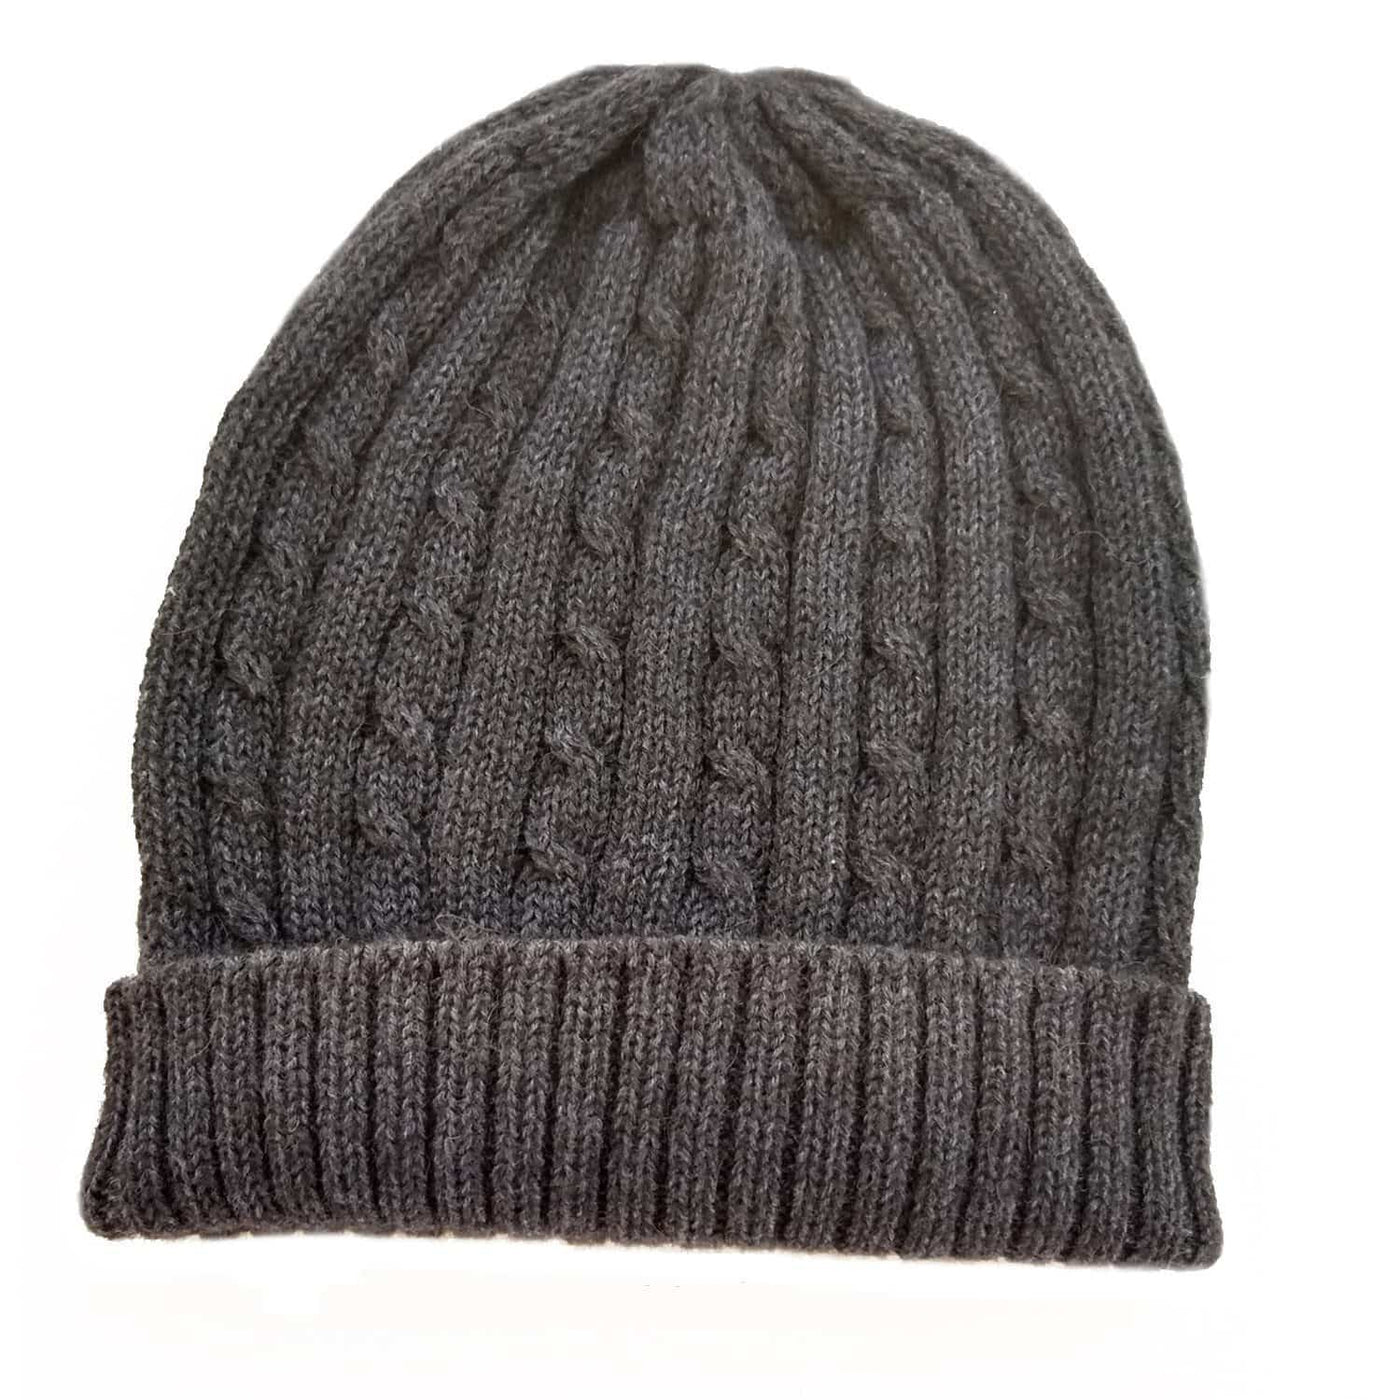 Cabled Bison/Silk Knitted Hat Bison Gear The Buffalo Wool Co. Charcoal 